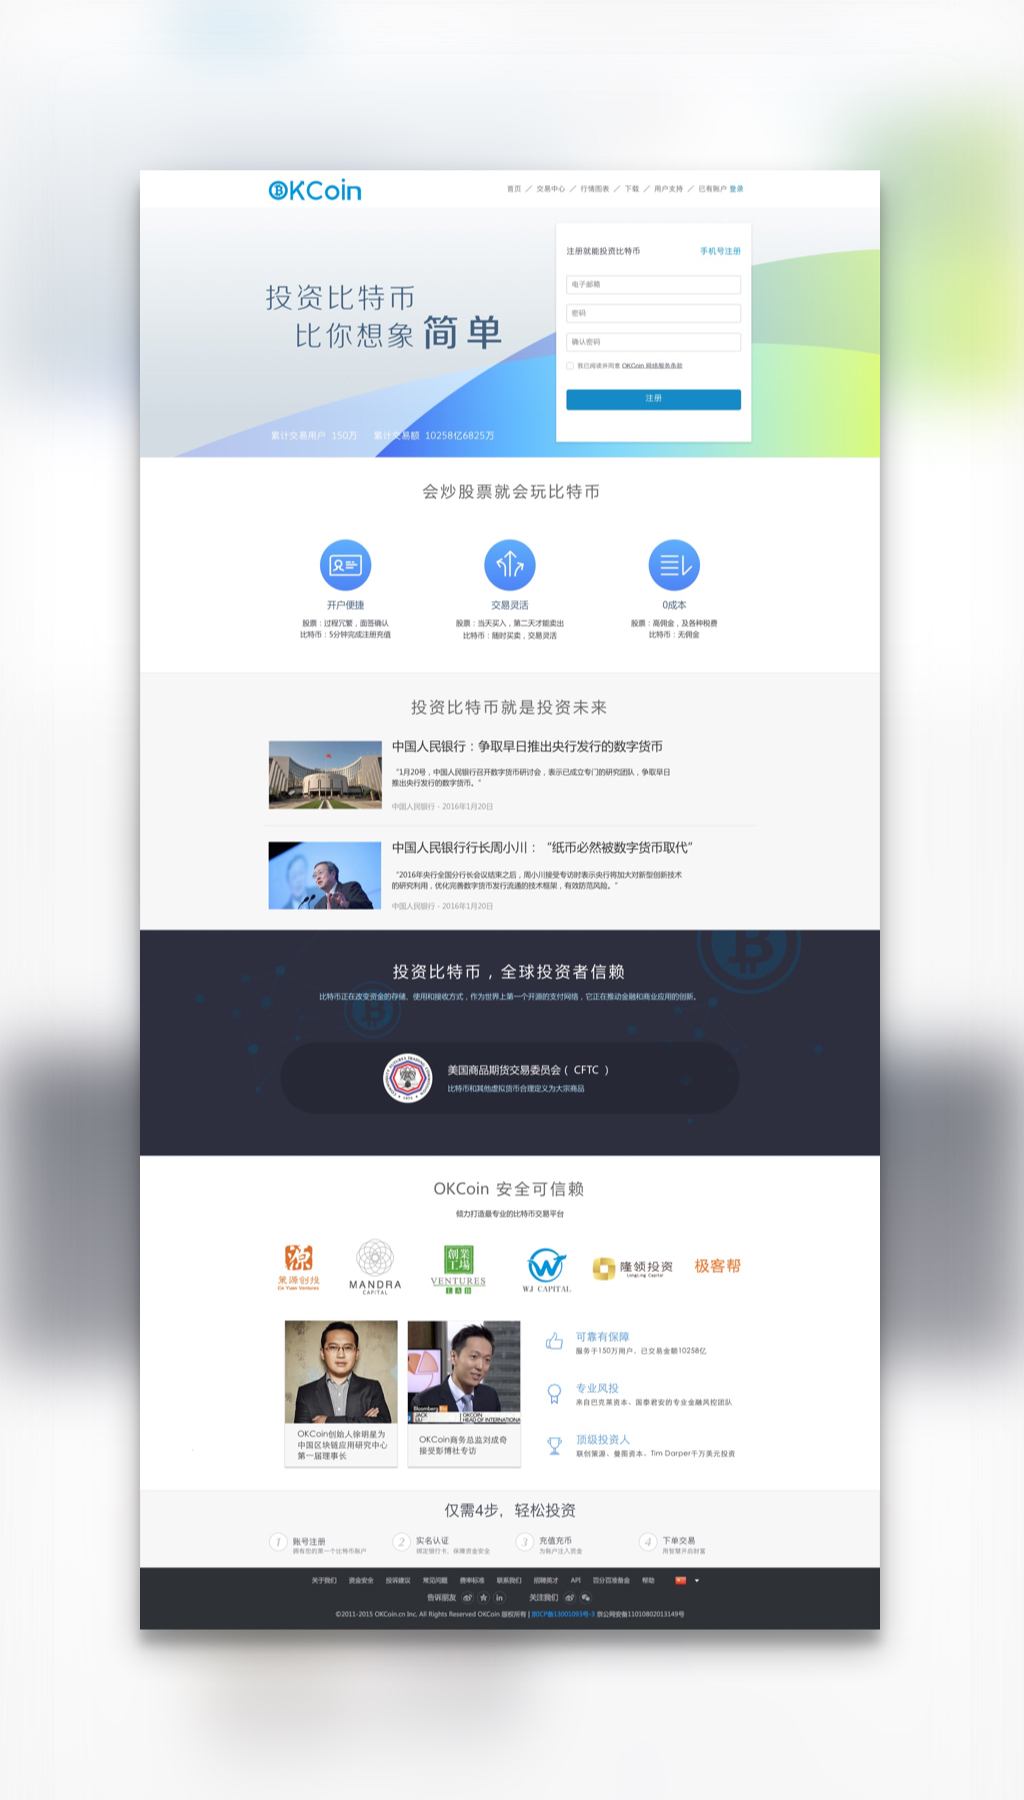 OKCoin, landing page redesign on Behance